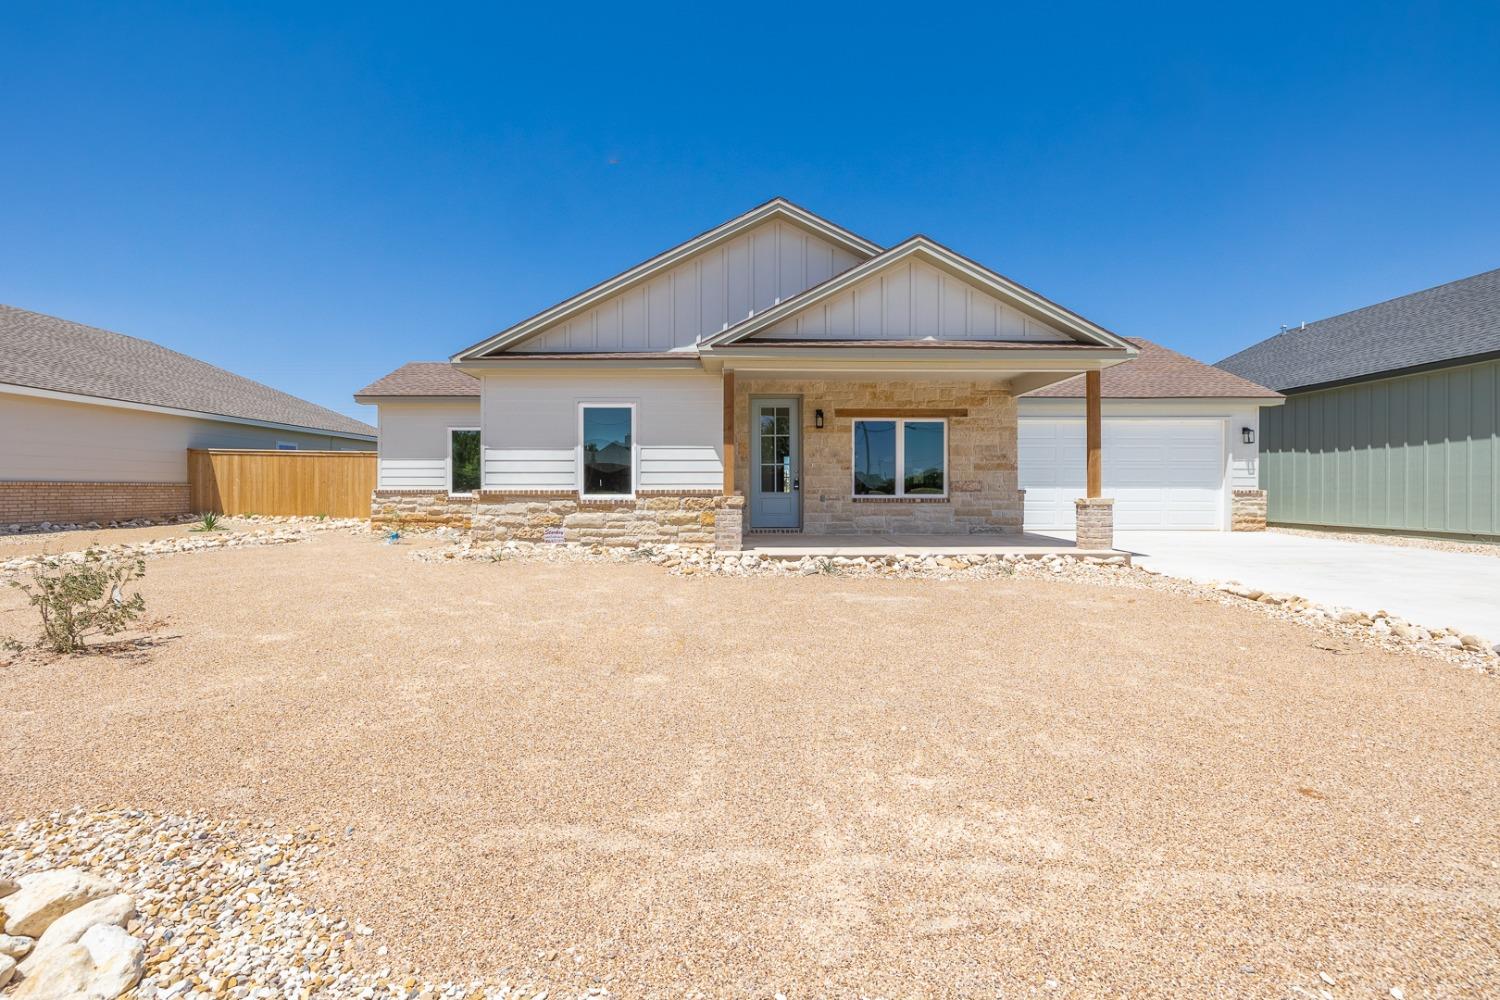 Charming 4 bedroom 2 bath home in Slaton!  Vinyl plank flooring throughout, stainless appliance package and a vaulted living room can all be found in this new home by J.M. Martin Custom Homes.